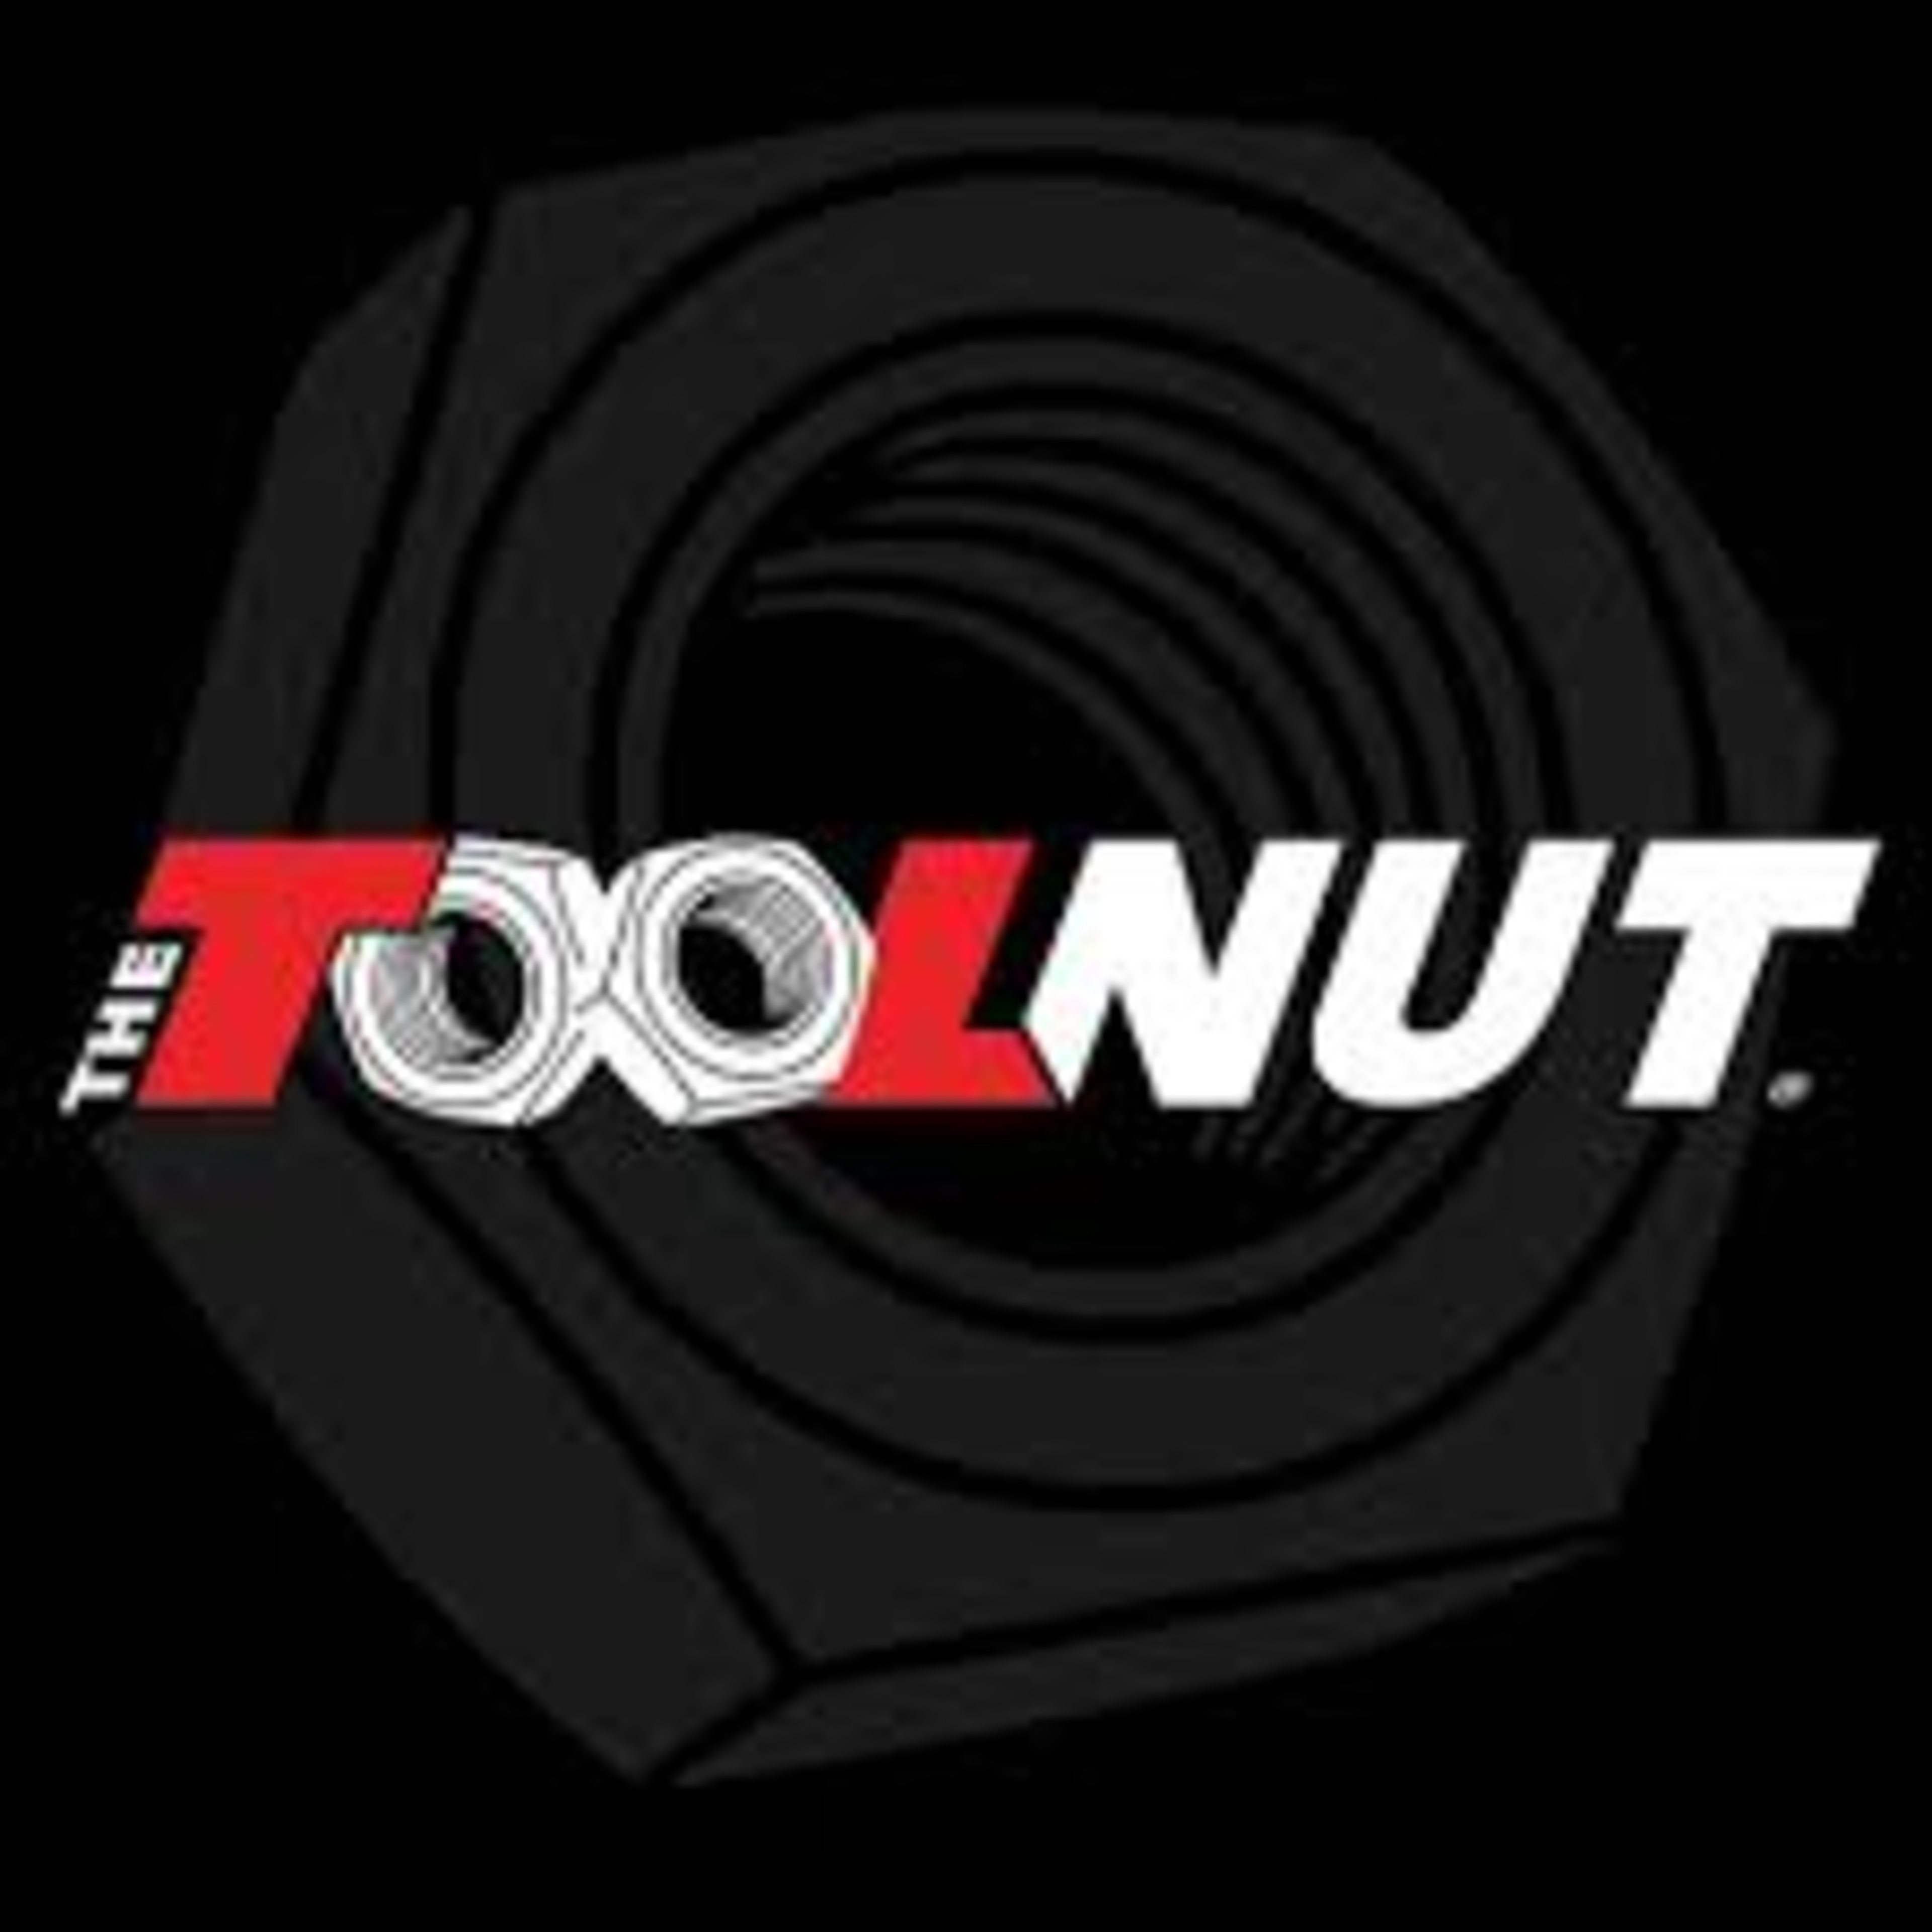 The Tool Nut Code